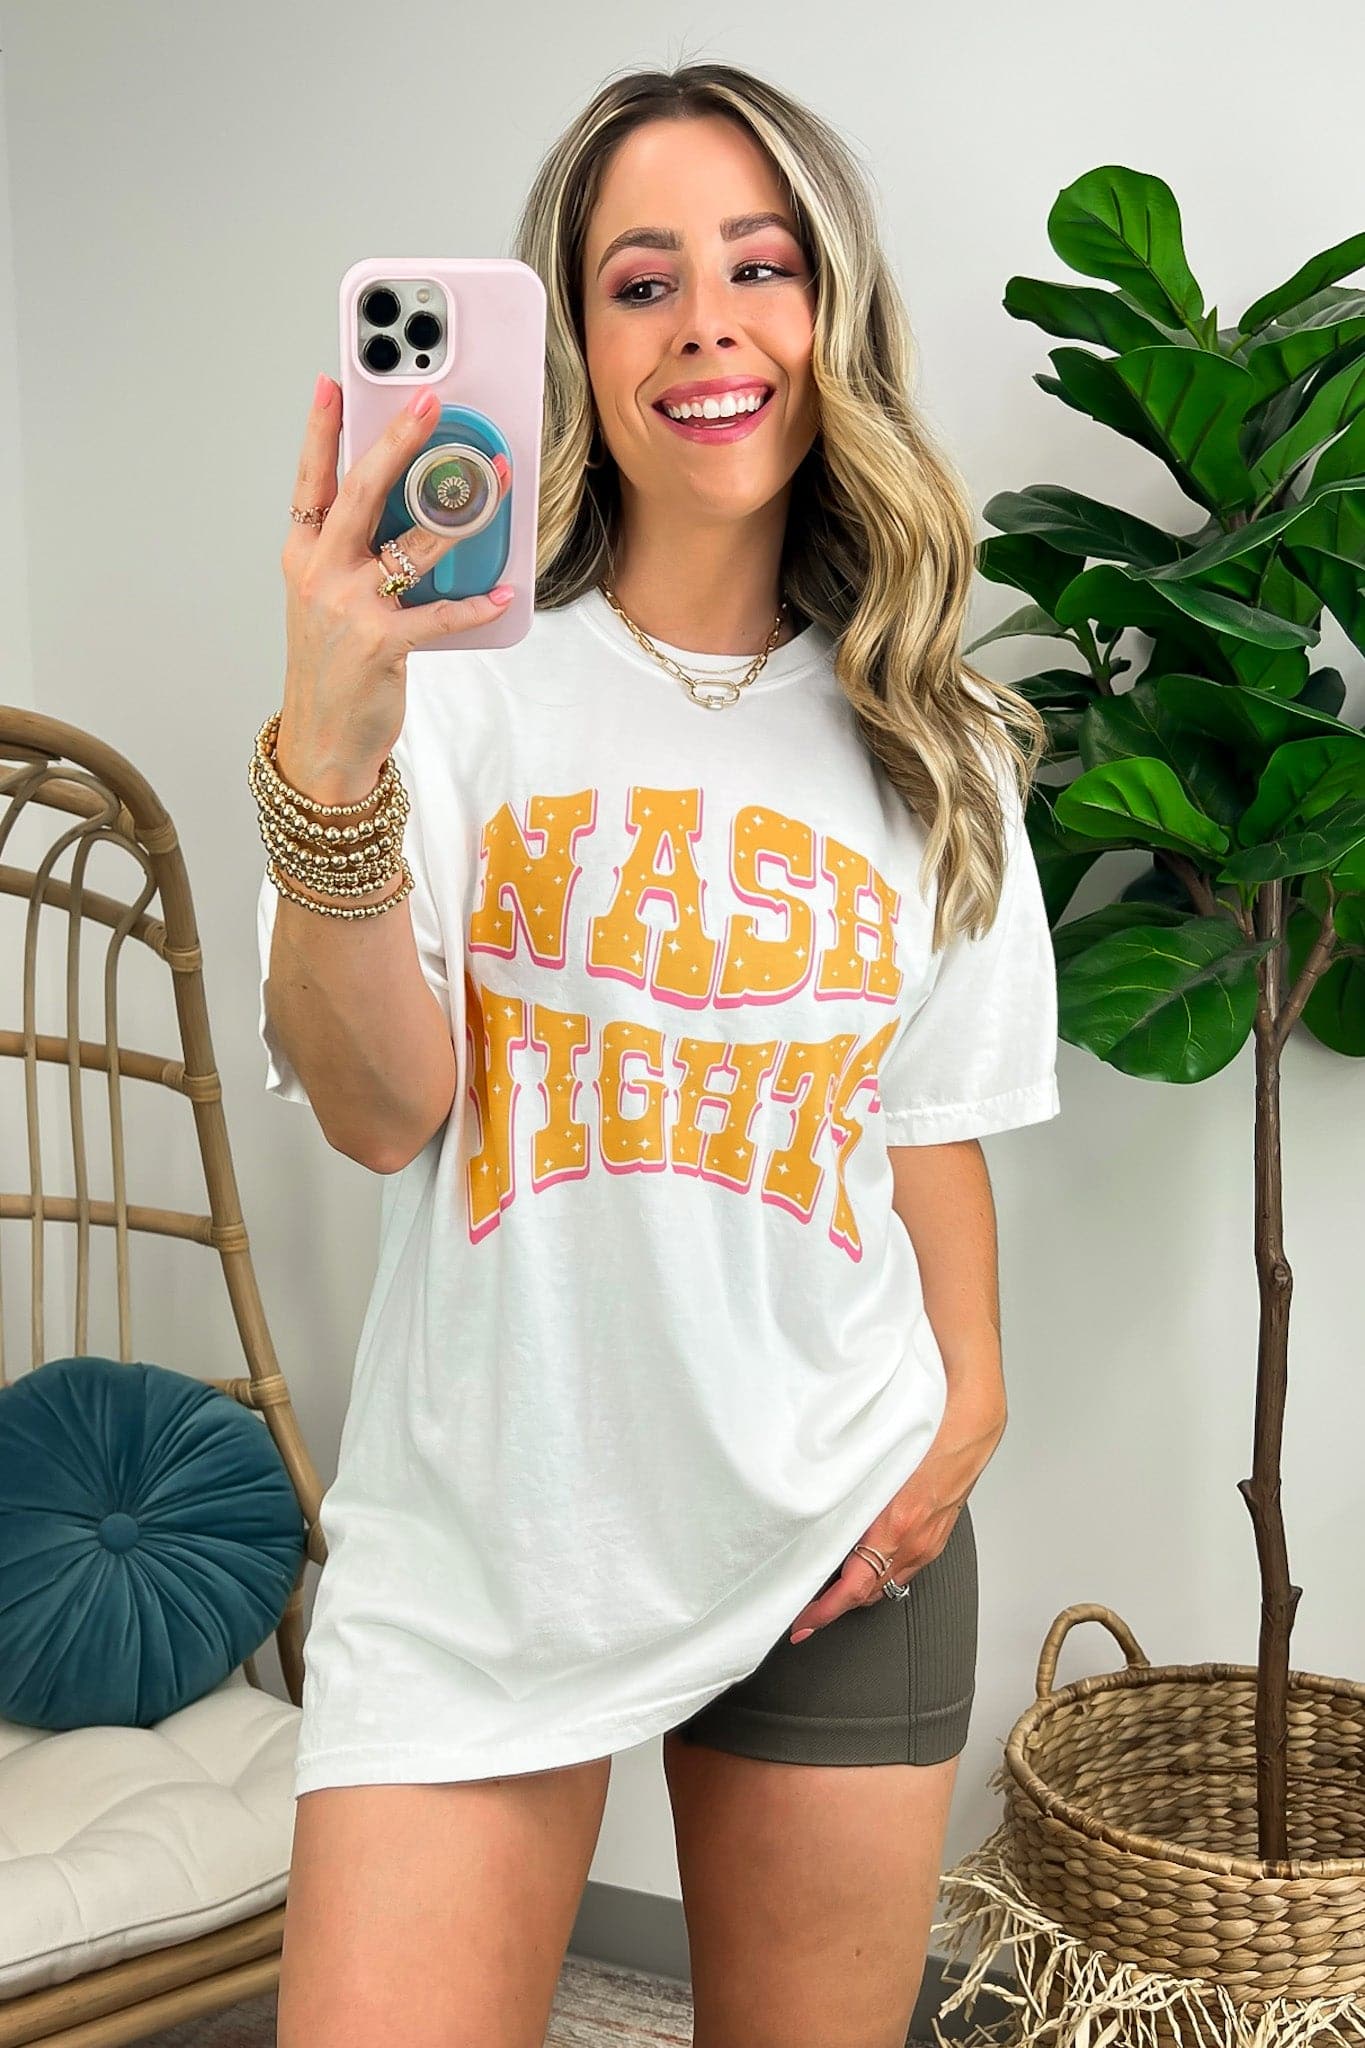  Nash Nights Oversized Graphic Tee - FINAL SALE - Madison and Mallory